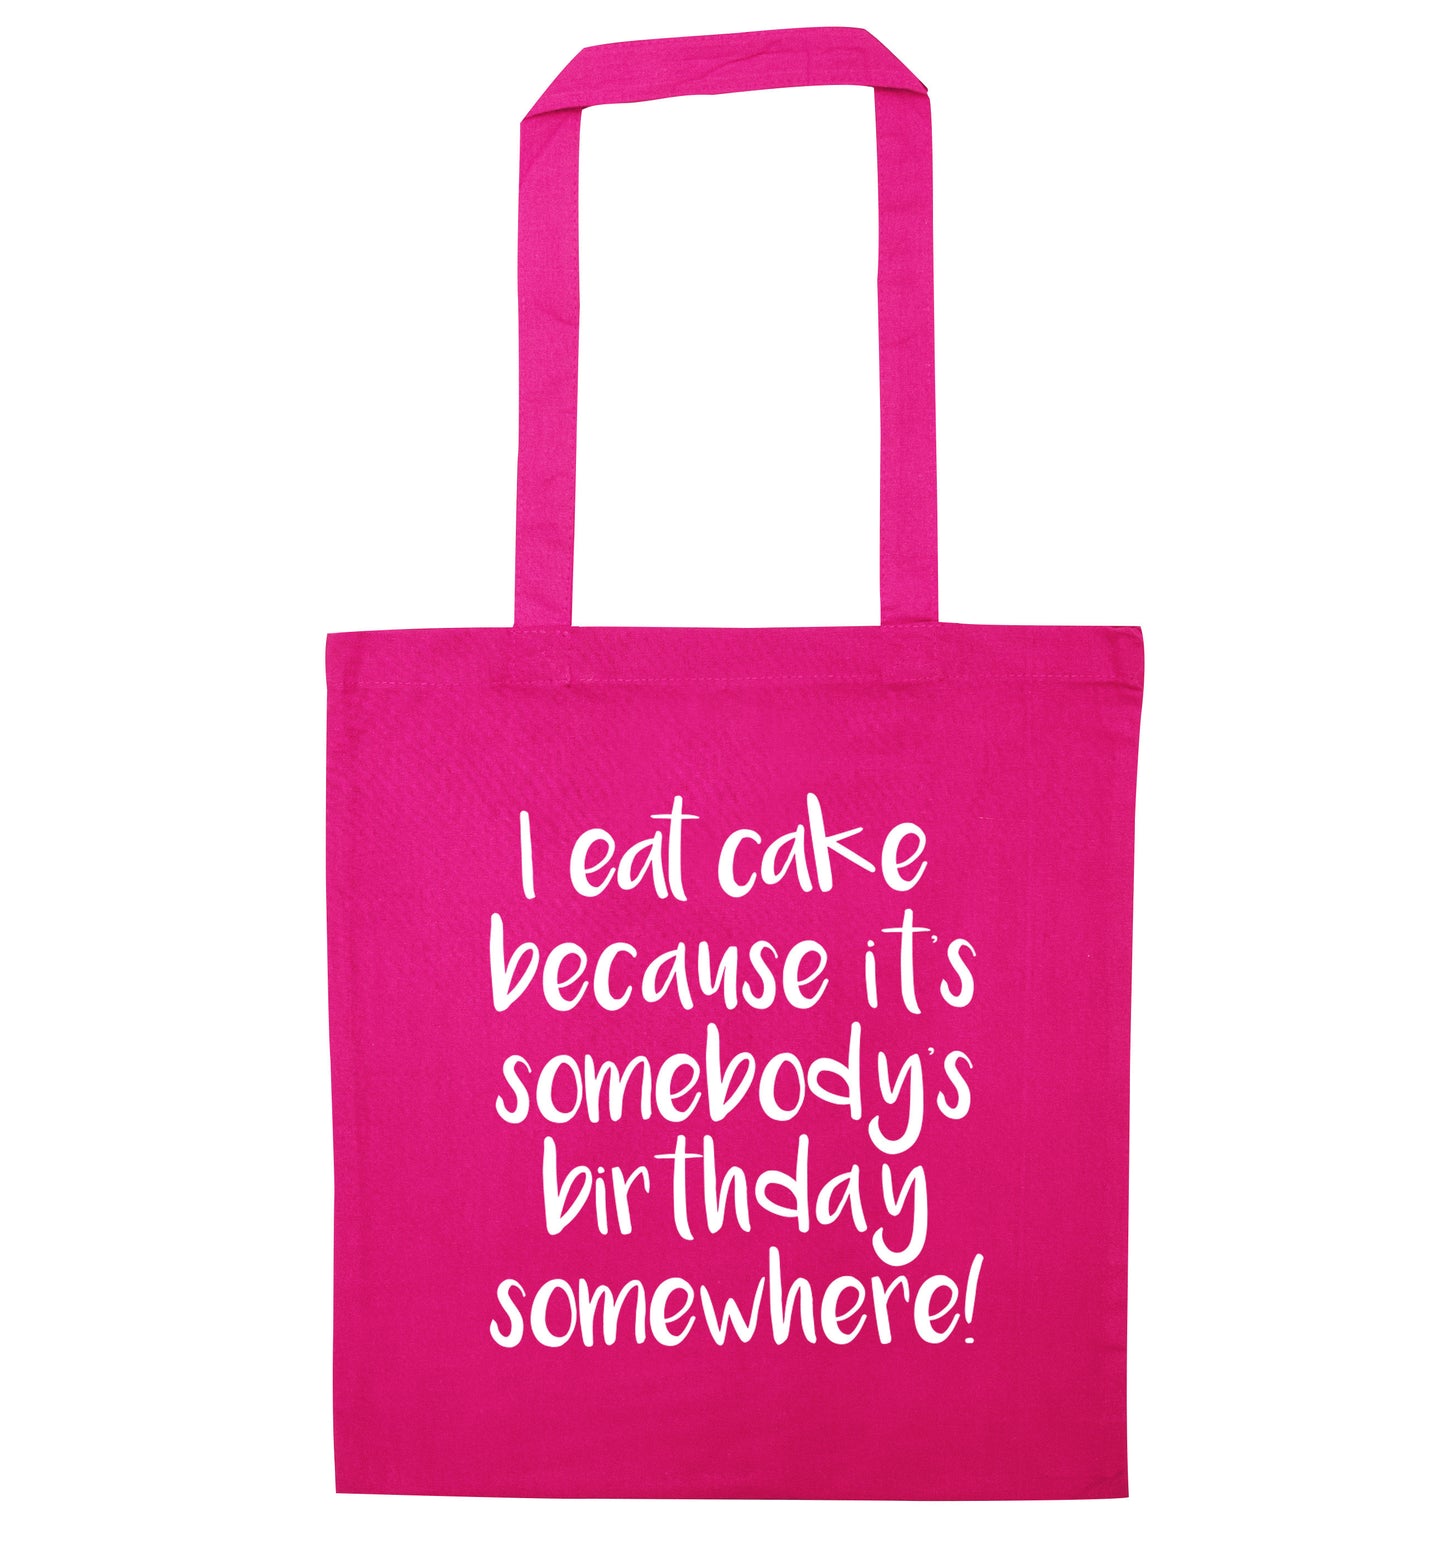 I eat cake because it's somebody's birthday somewhere! pink tote bag